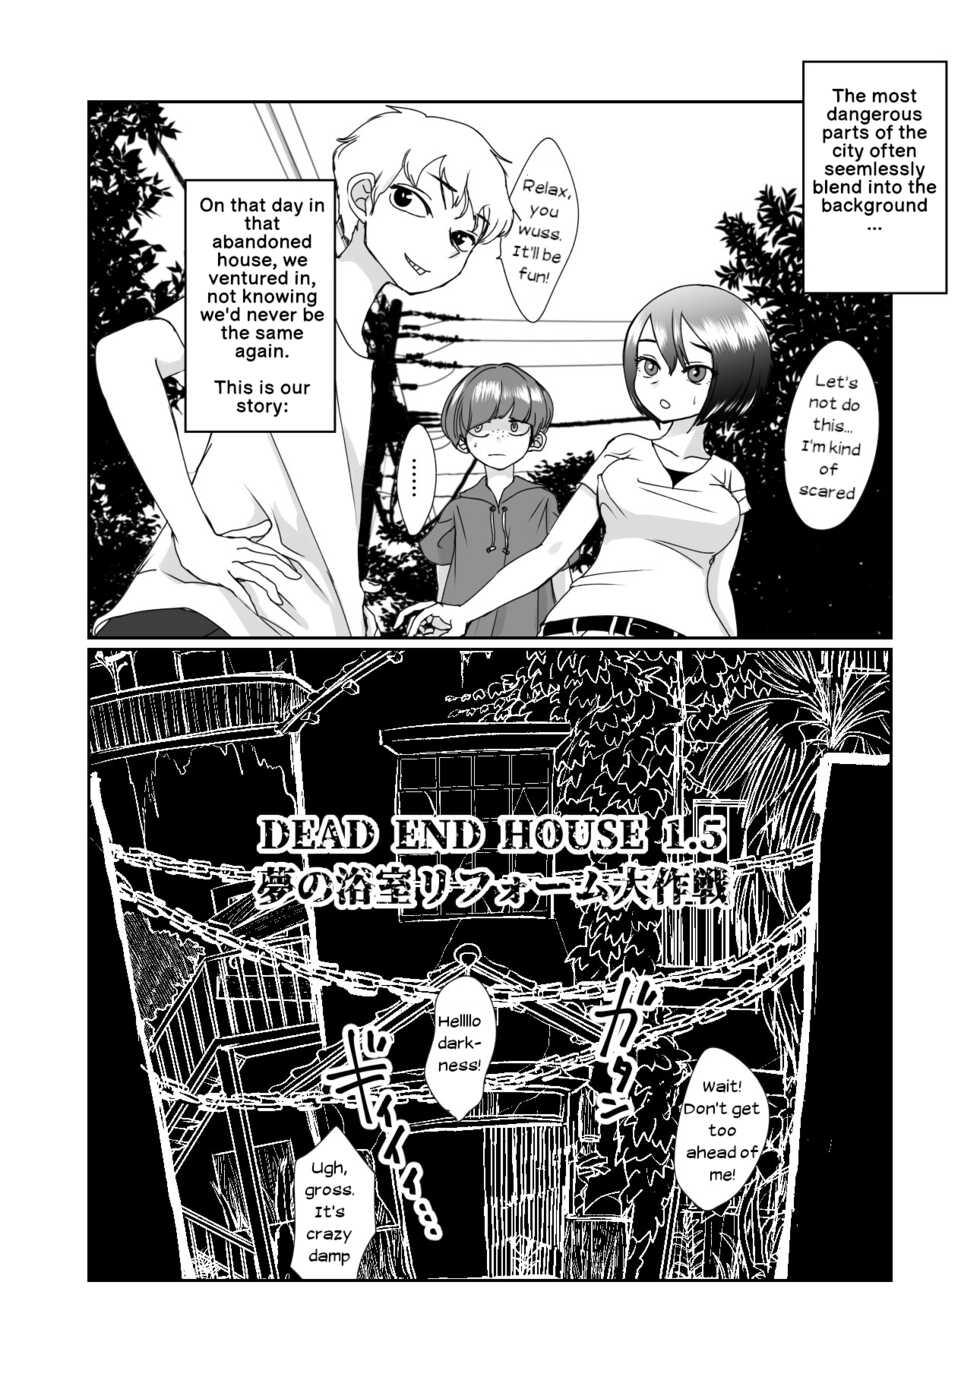 [Shimanami (Archipelago)] Dead End House Anthology - (The Chandelier/1.5/The Exorcist/Spinoff Expansions) [Ongoing] - Page 38